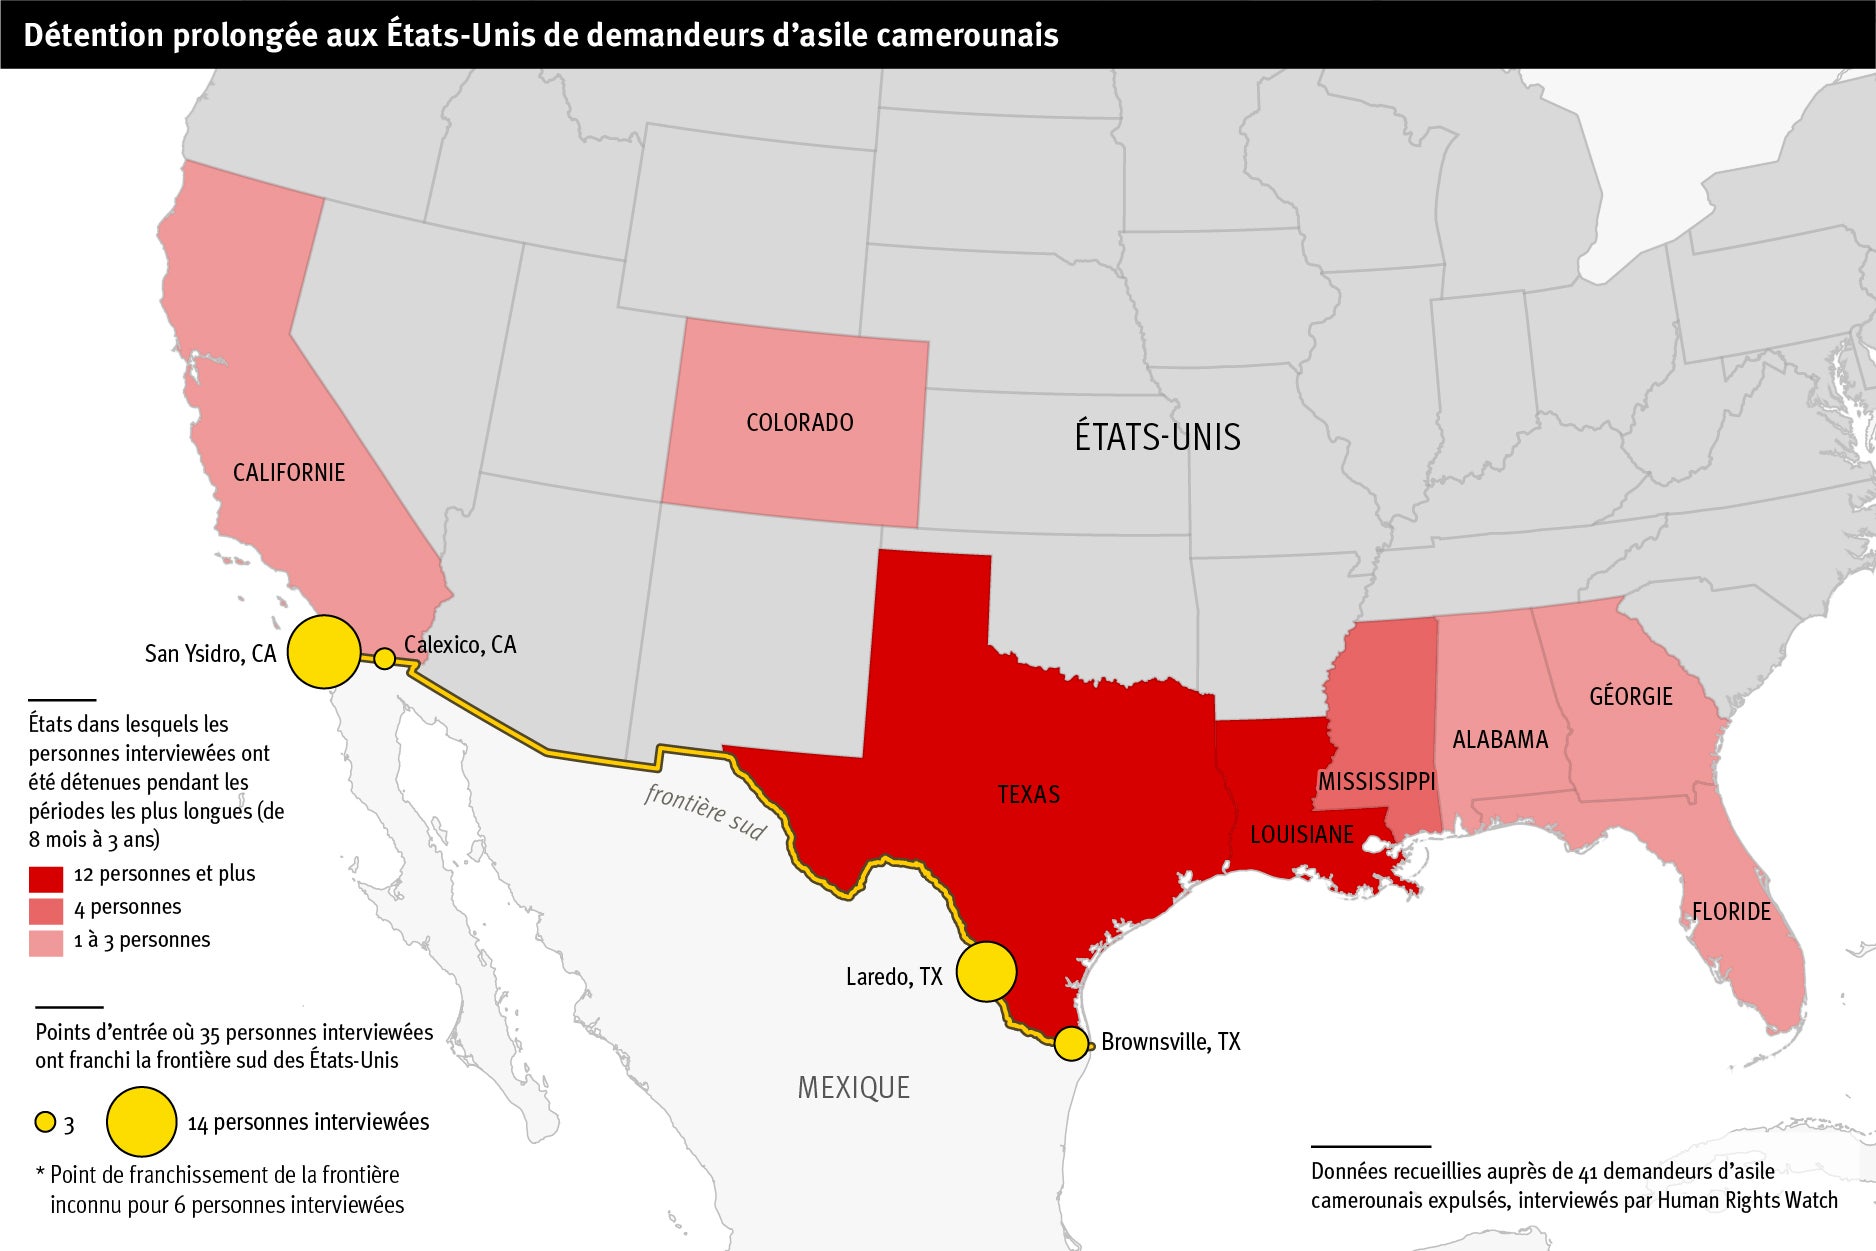 Map of the US showing detention sites